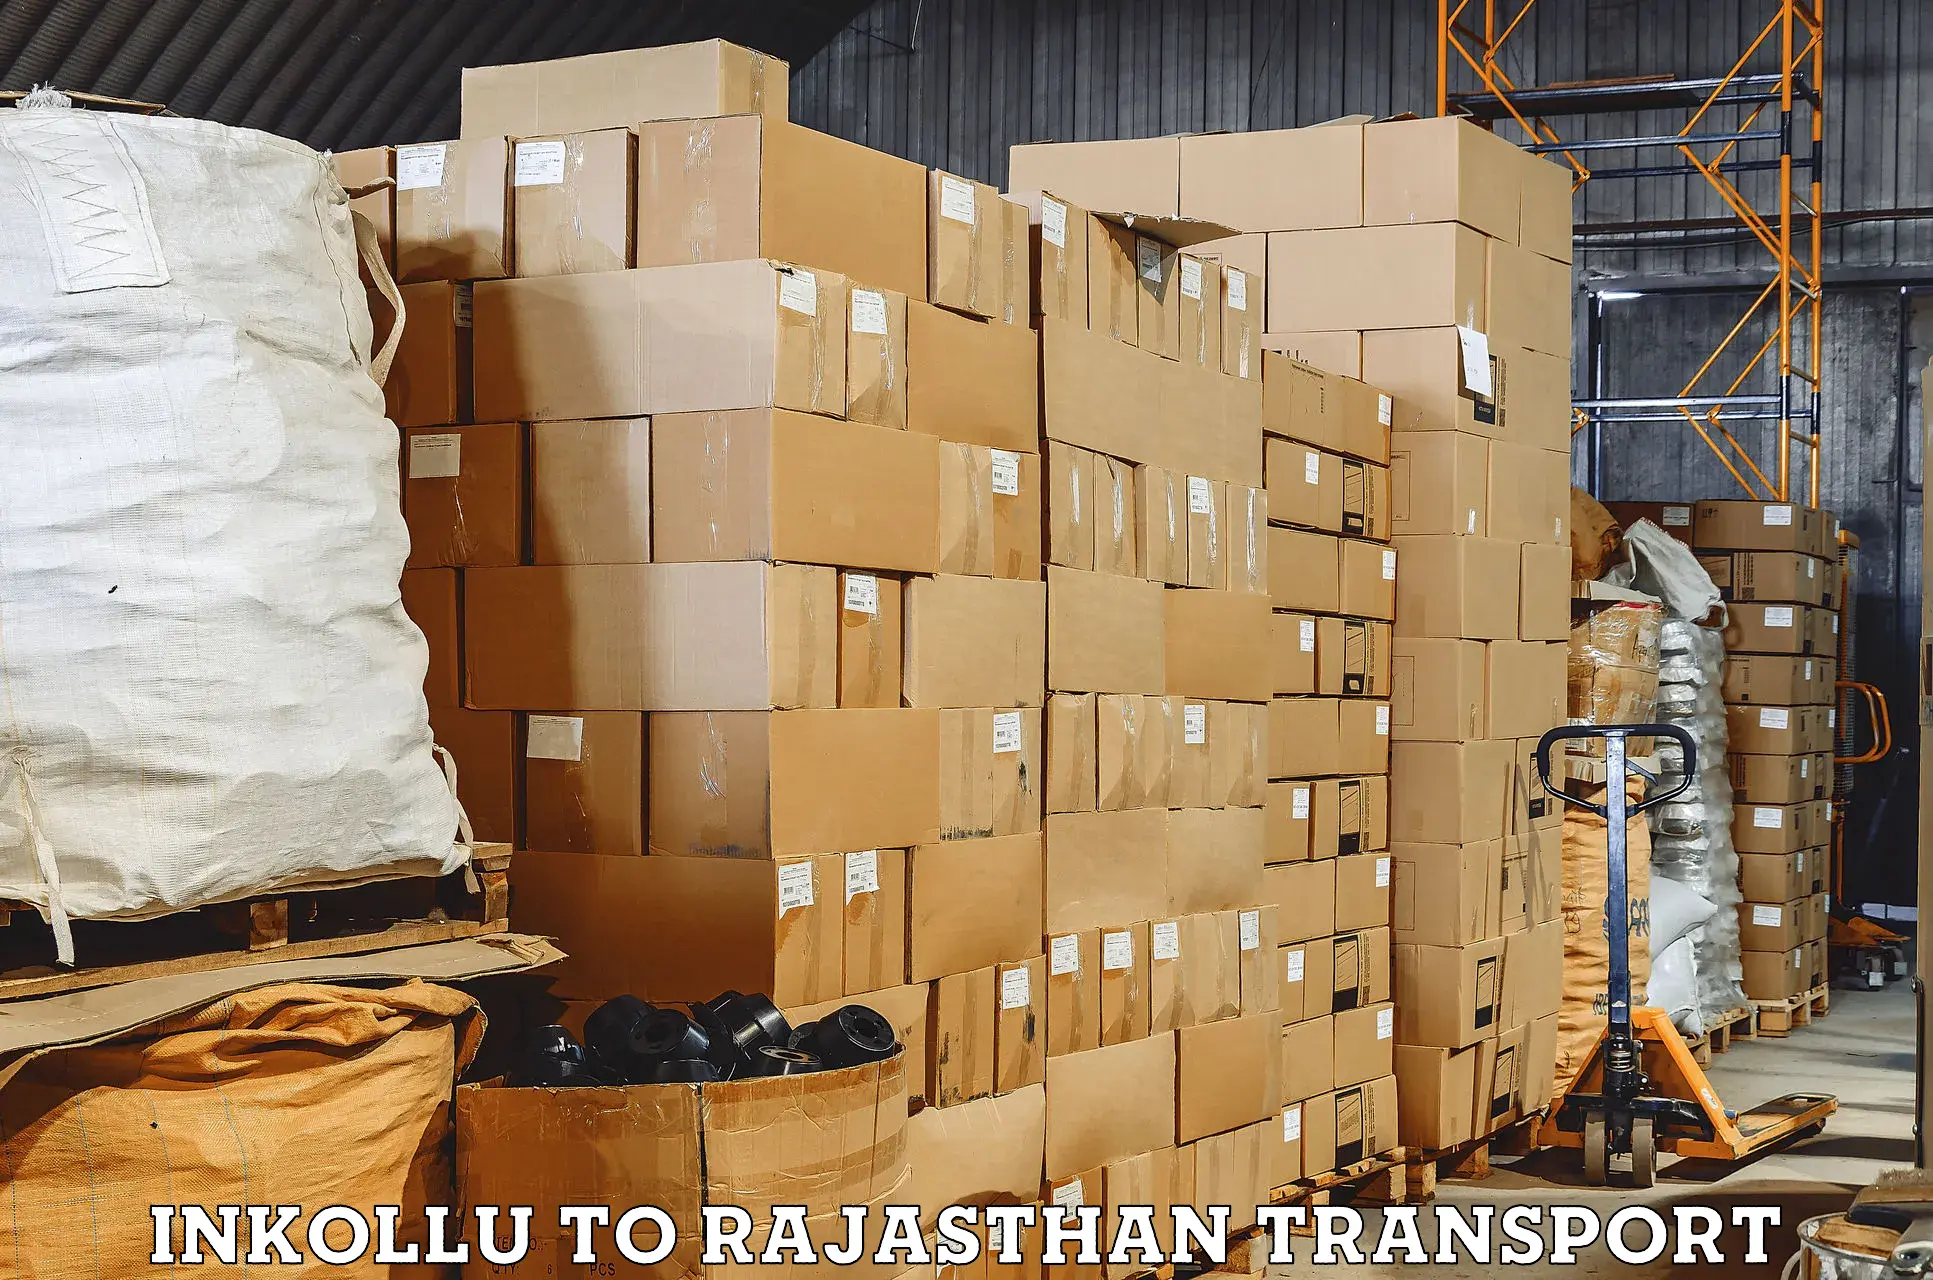 Transport bike from one state to another Inkollu to Rajasthan